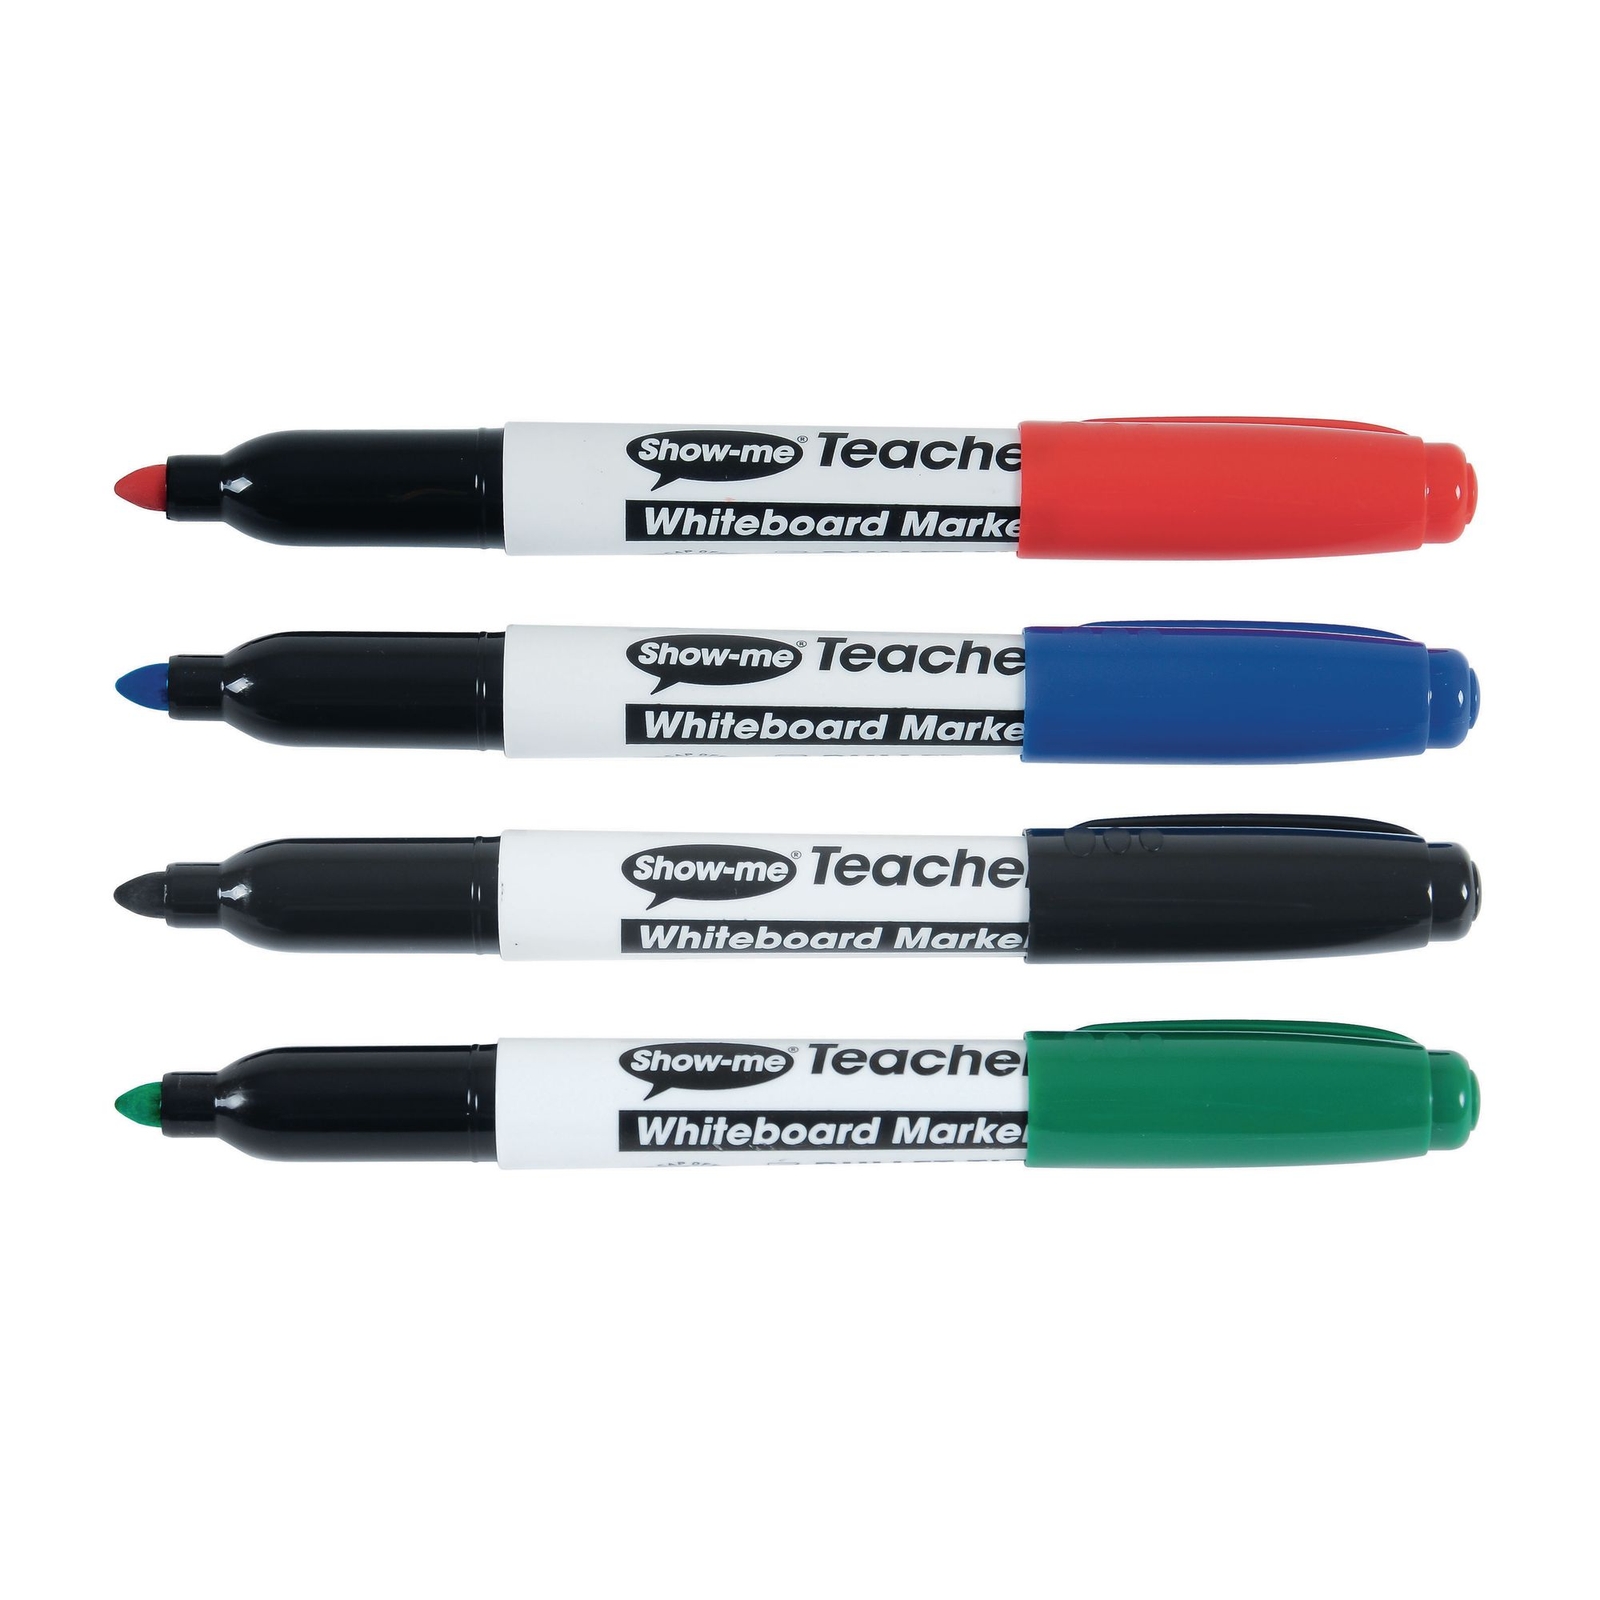 Show-me TEACHER Dry Wipe  Pen, Assorted - Pack of 4